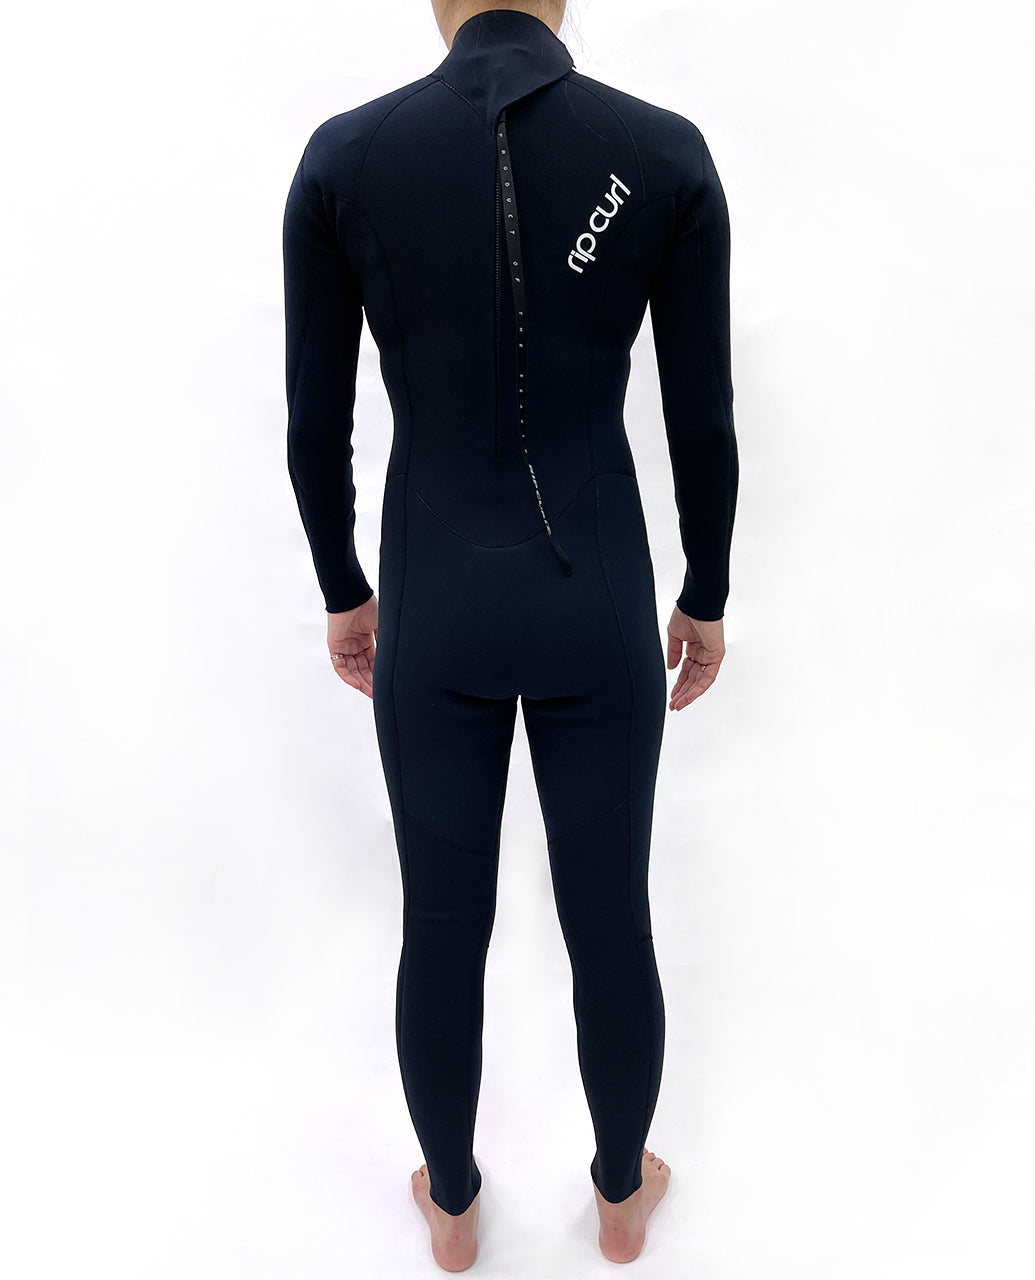 [SALE] [Spring/Autumn] Women's OMEGA 3/2mm Back Zip Full Suit Wetsuit Made in Japan